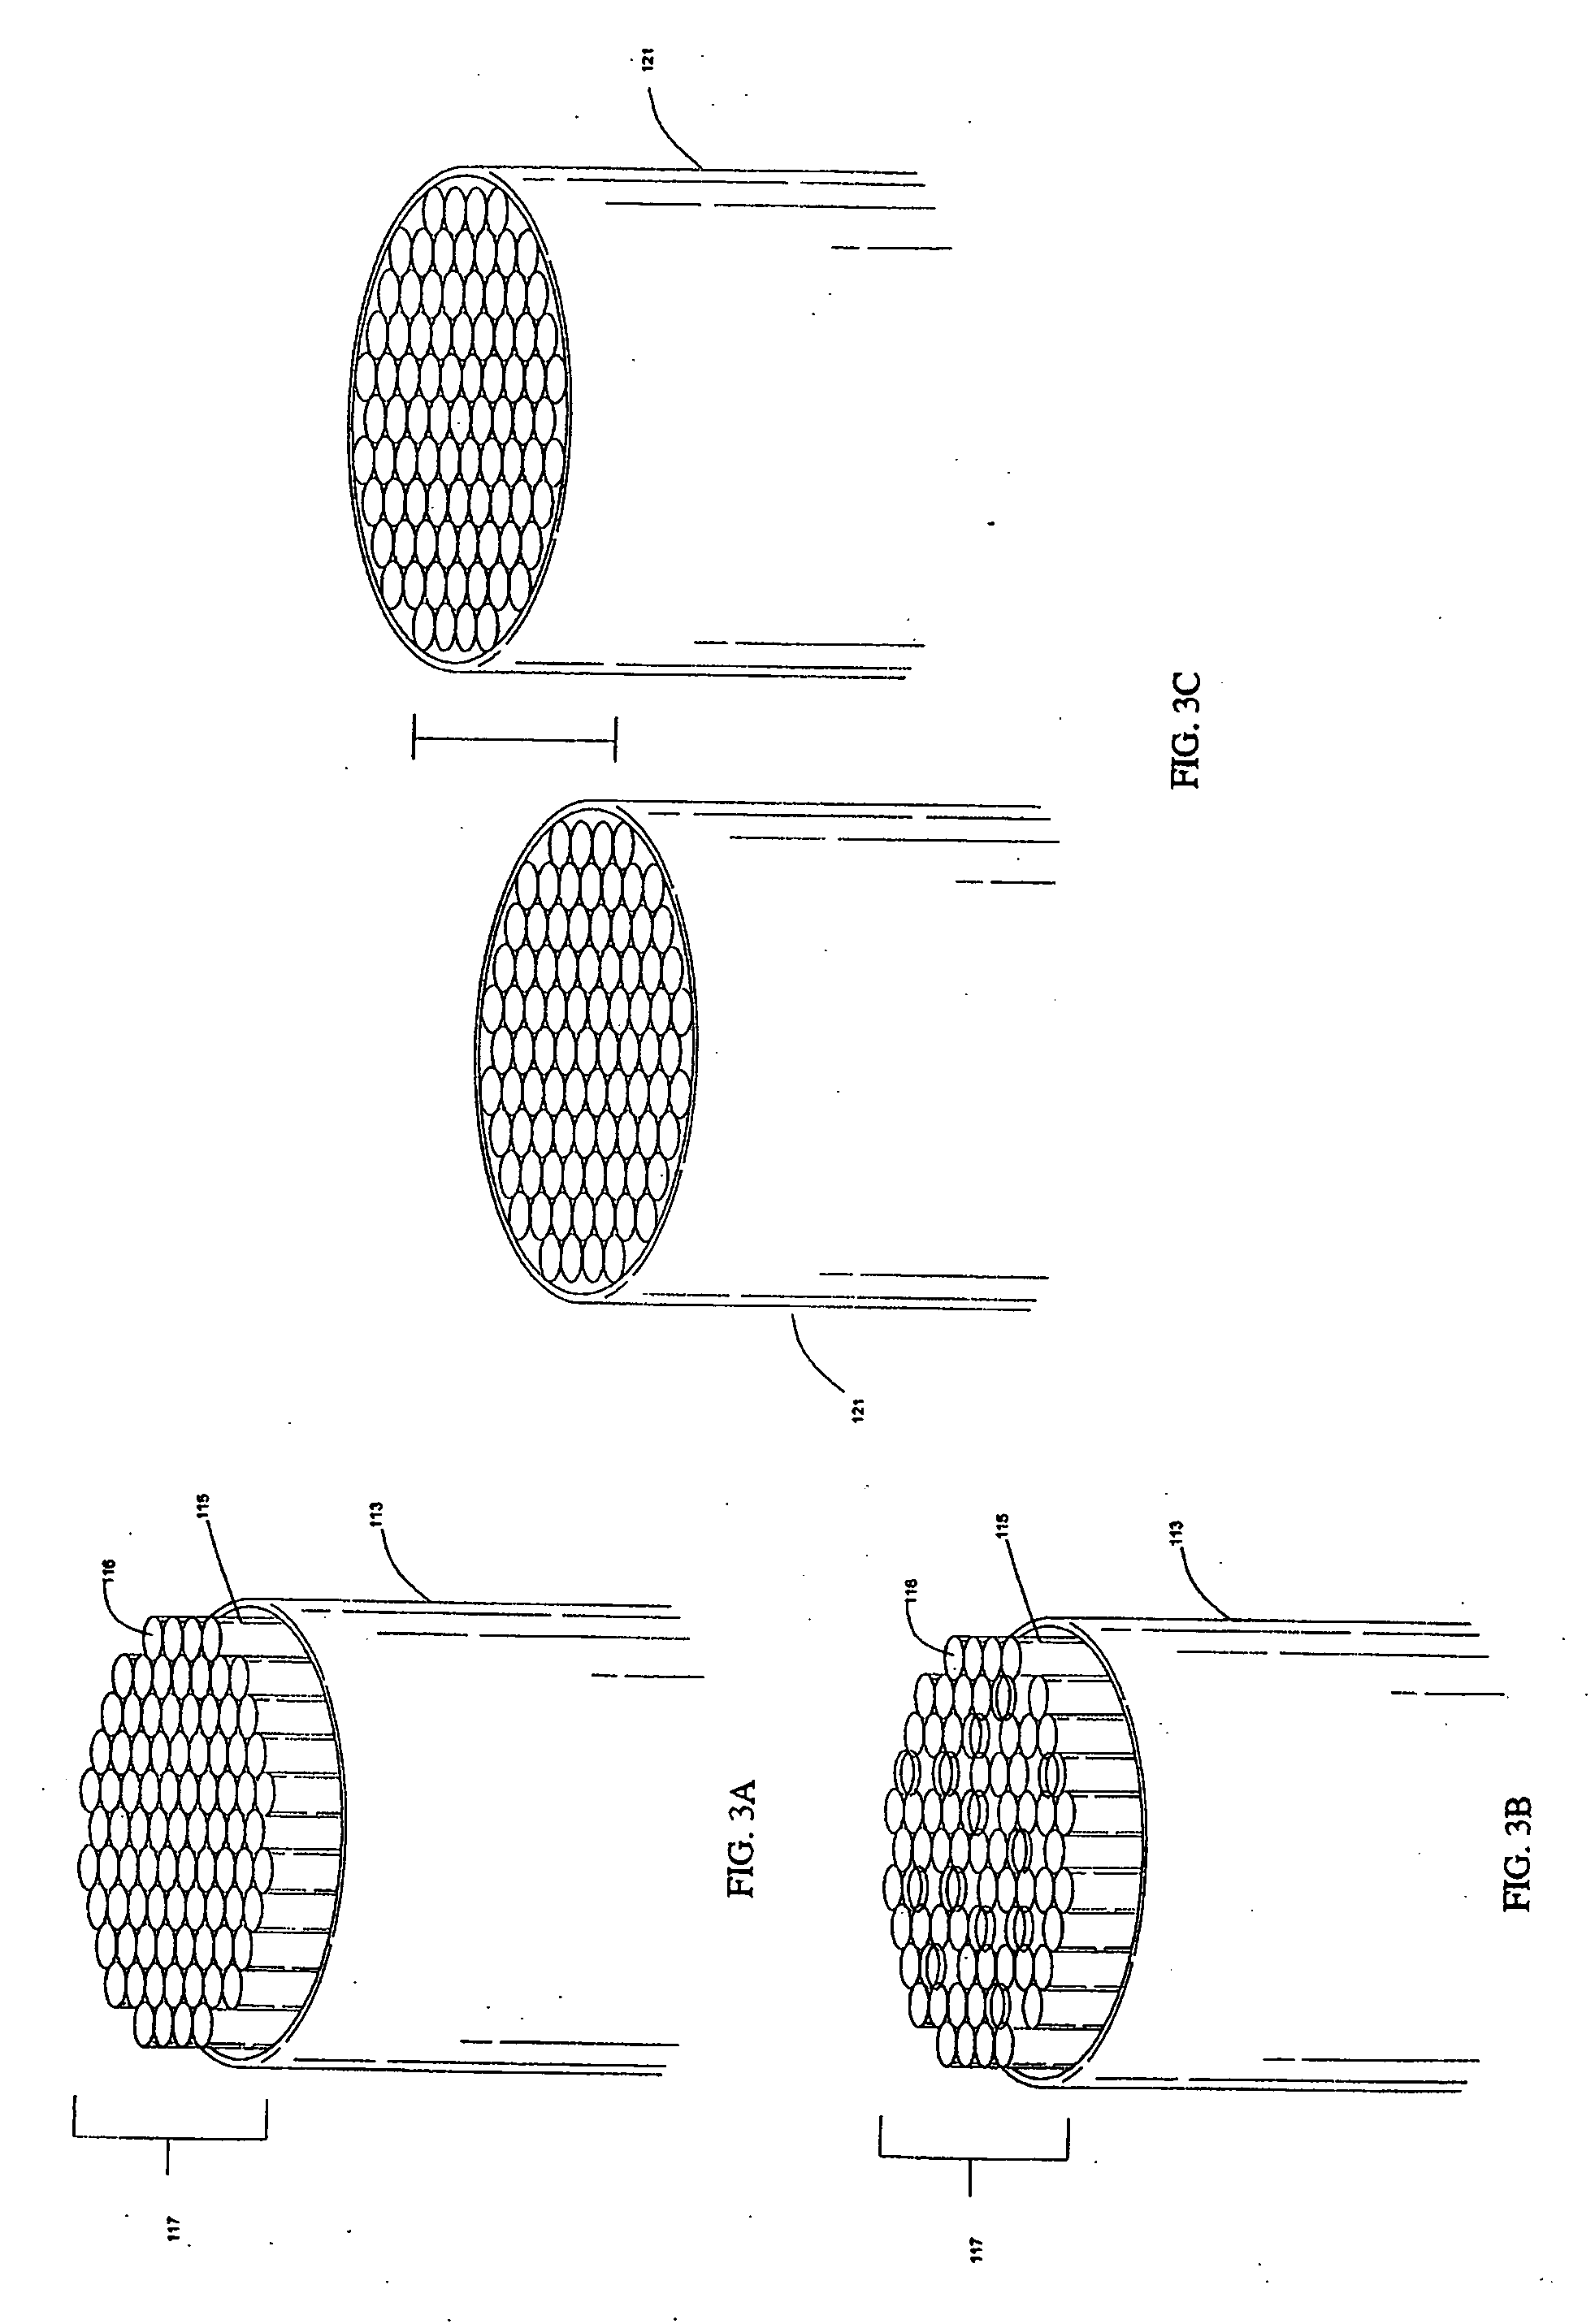 Multiaxis focusing mechanism for microarray analysis